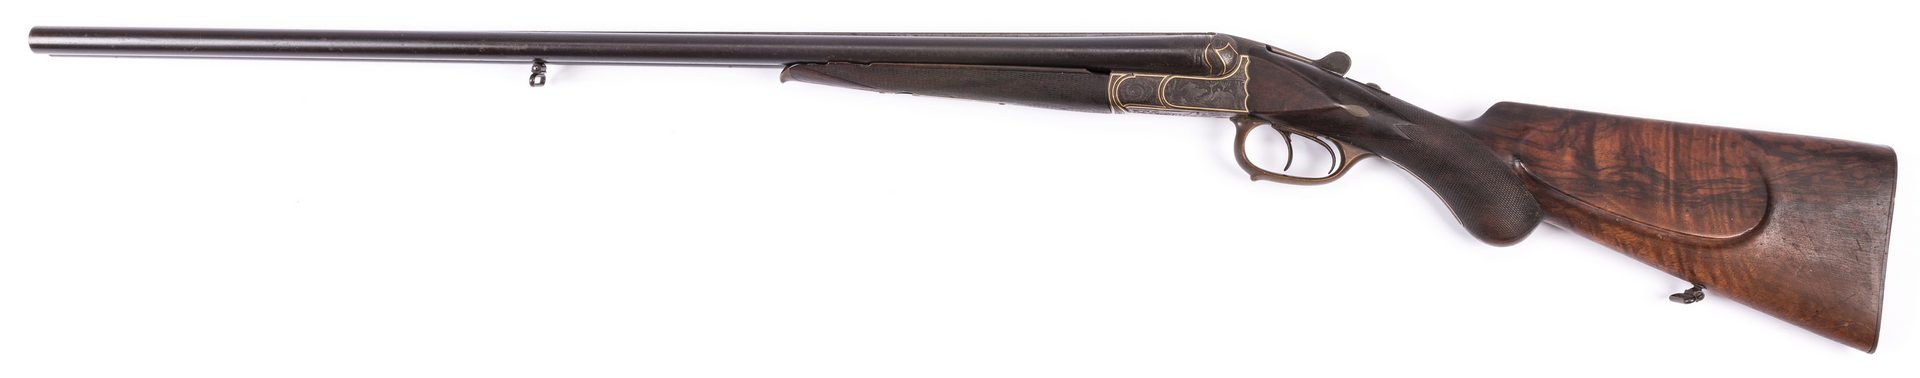 Lot 792: German Philipp Reeb Relief Engraved Double Shotgun, Early 20th century